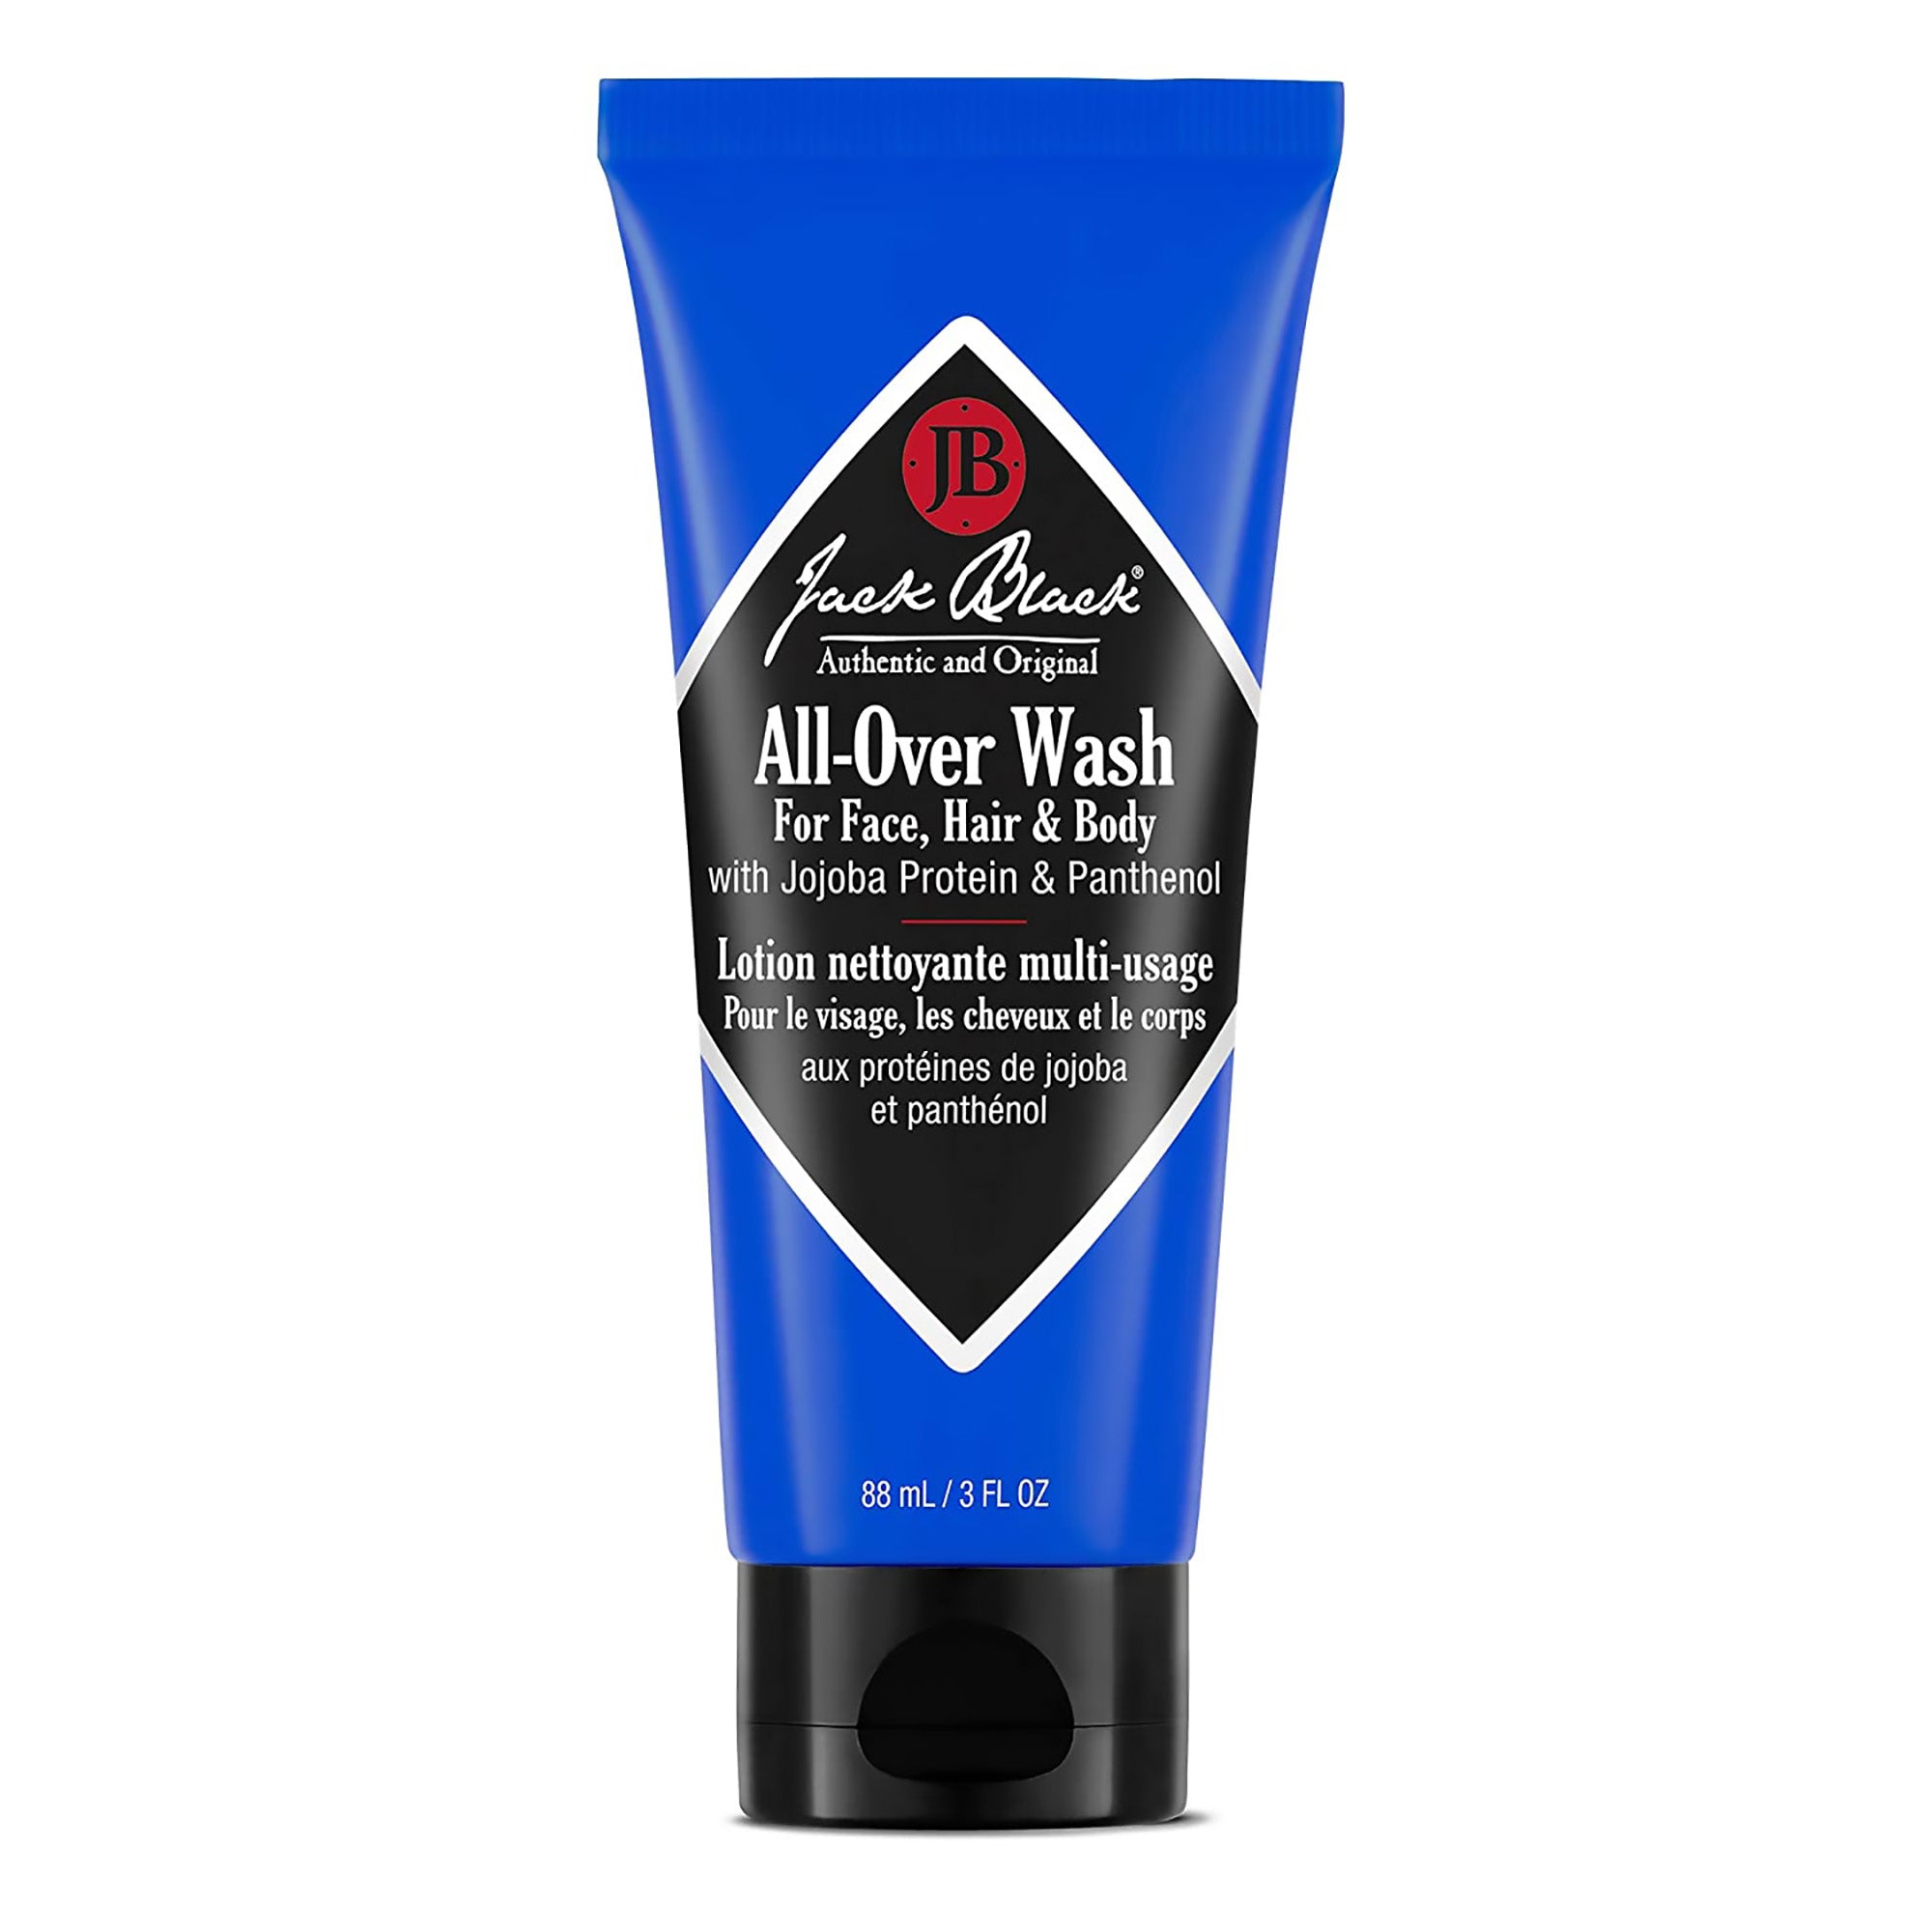 Jack Black All-Over Wash for Face, Hair & Body / 3OZ